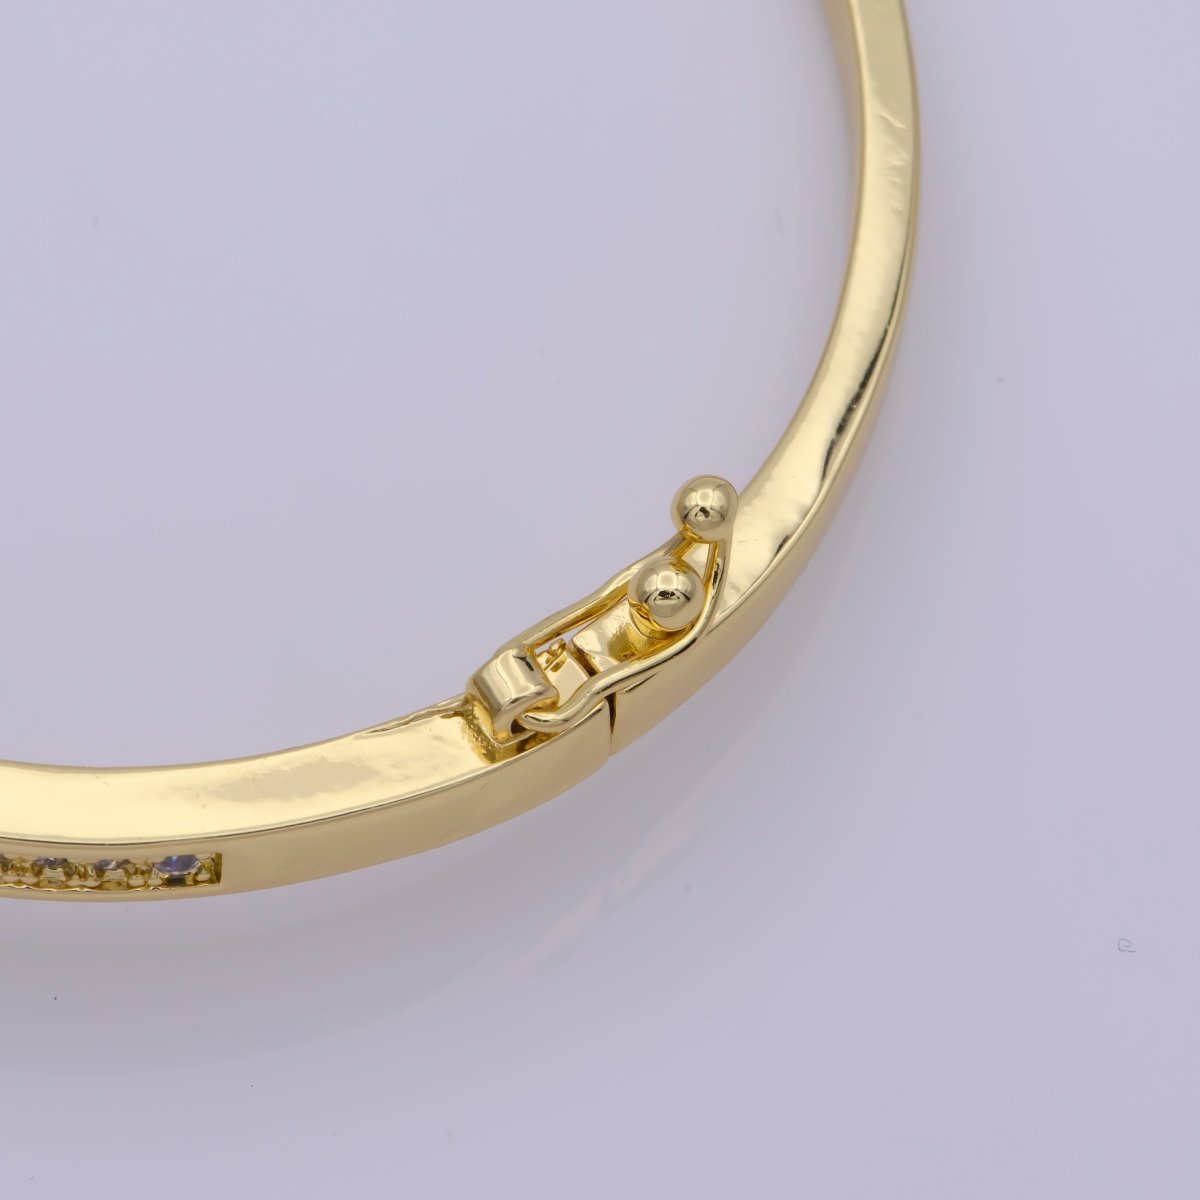 Gold bangle Bracelet Octagon with CZ Bracelets, Wrap Bracelet, Cubic Zirconia Jewelry For Christmas Gift Gold Diamond Minimalist Cuff | Hinged Cuff | Open Gold Cuff | Gift for her WA-426 Clearance Pricing - DLUXCA